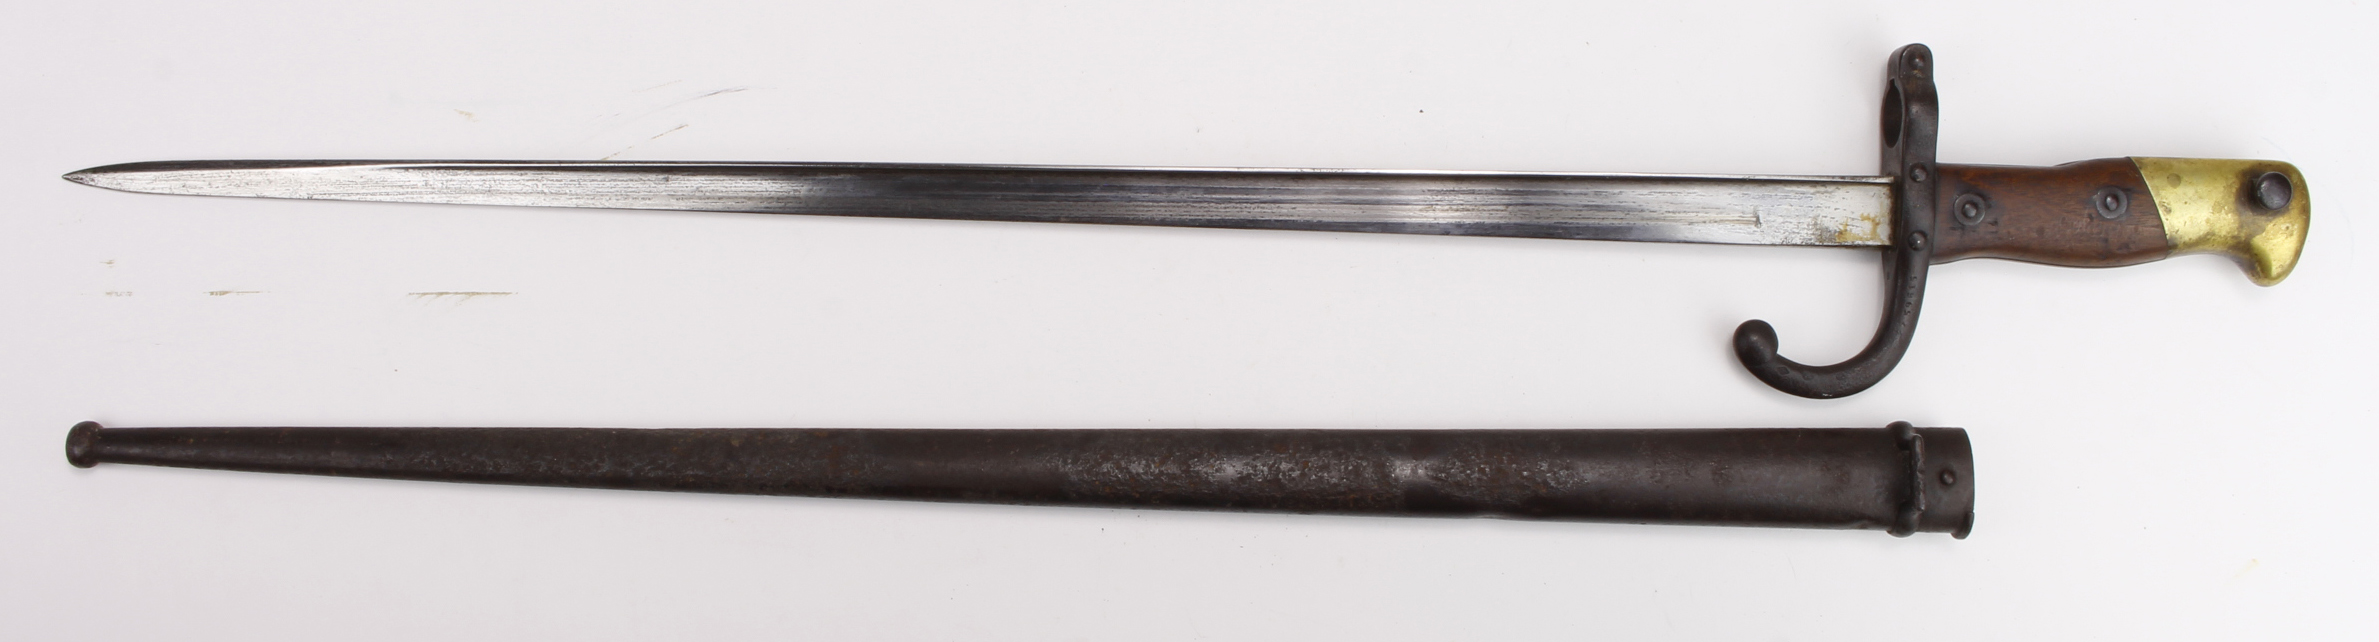 French Epee Bayonet dated 1876, with metal scabbard